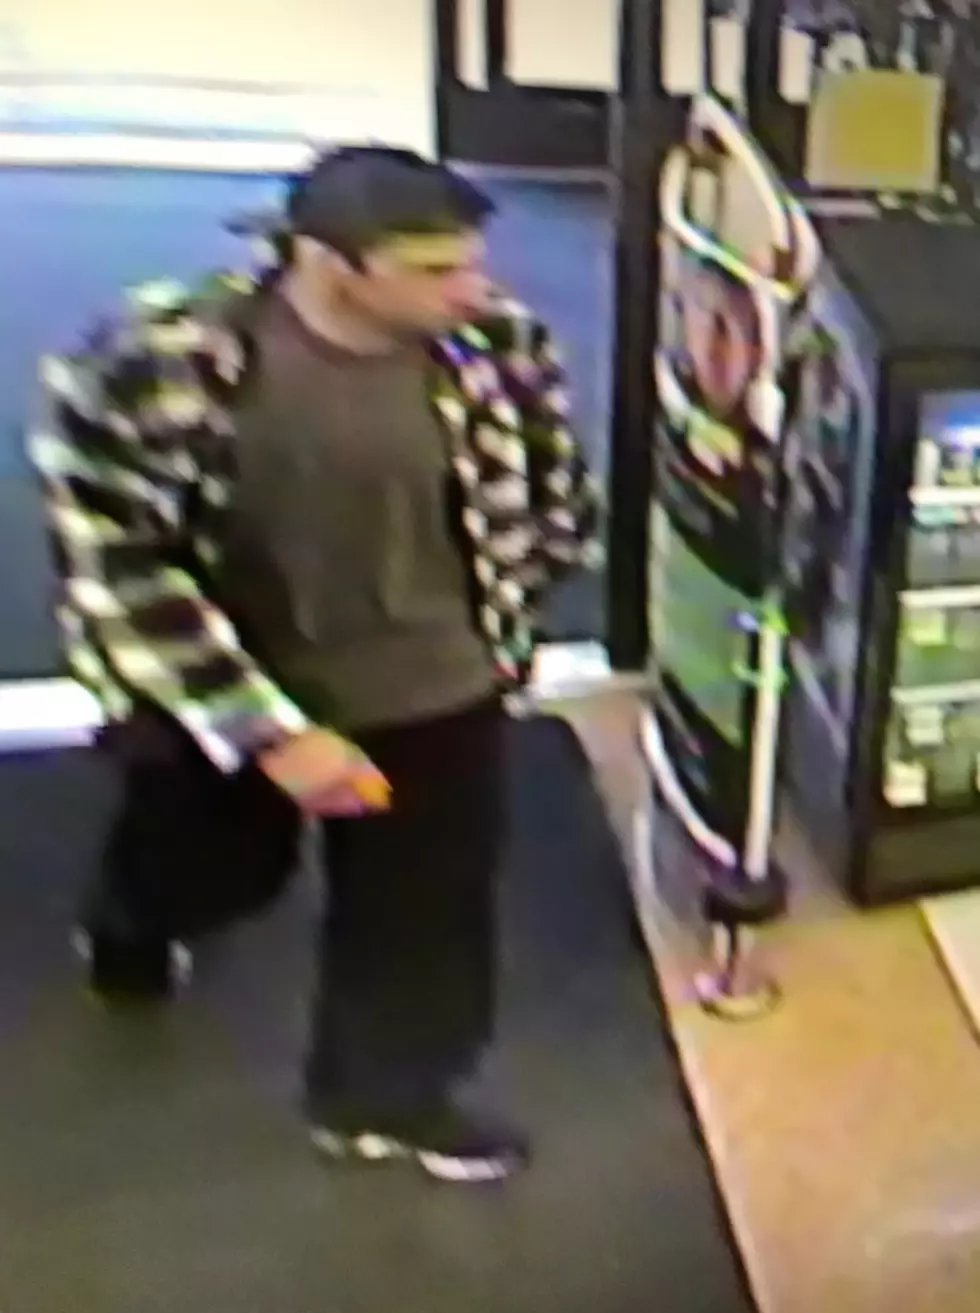 Felony Retail Theft Suspect Sought in Richland Rite-Aid Case